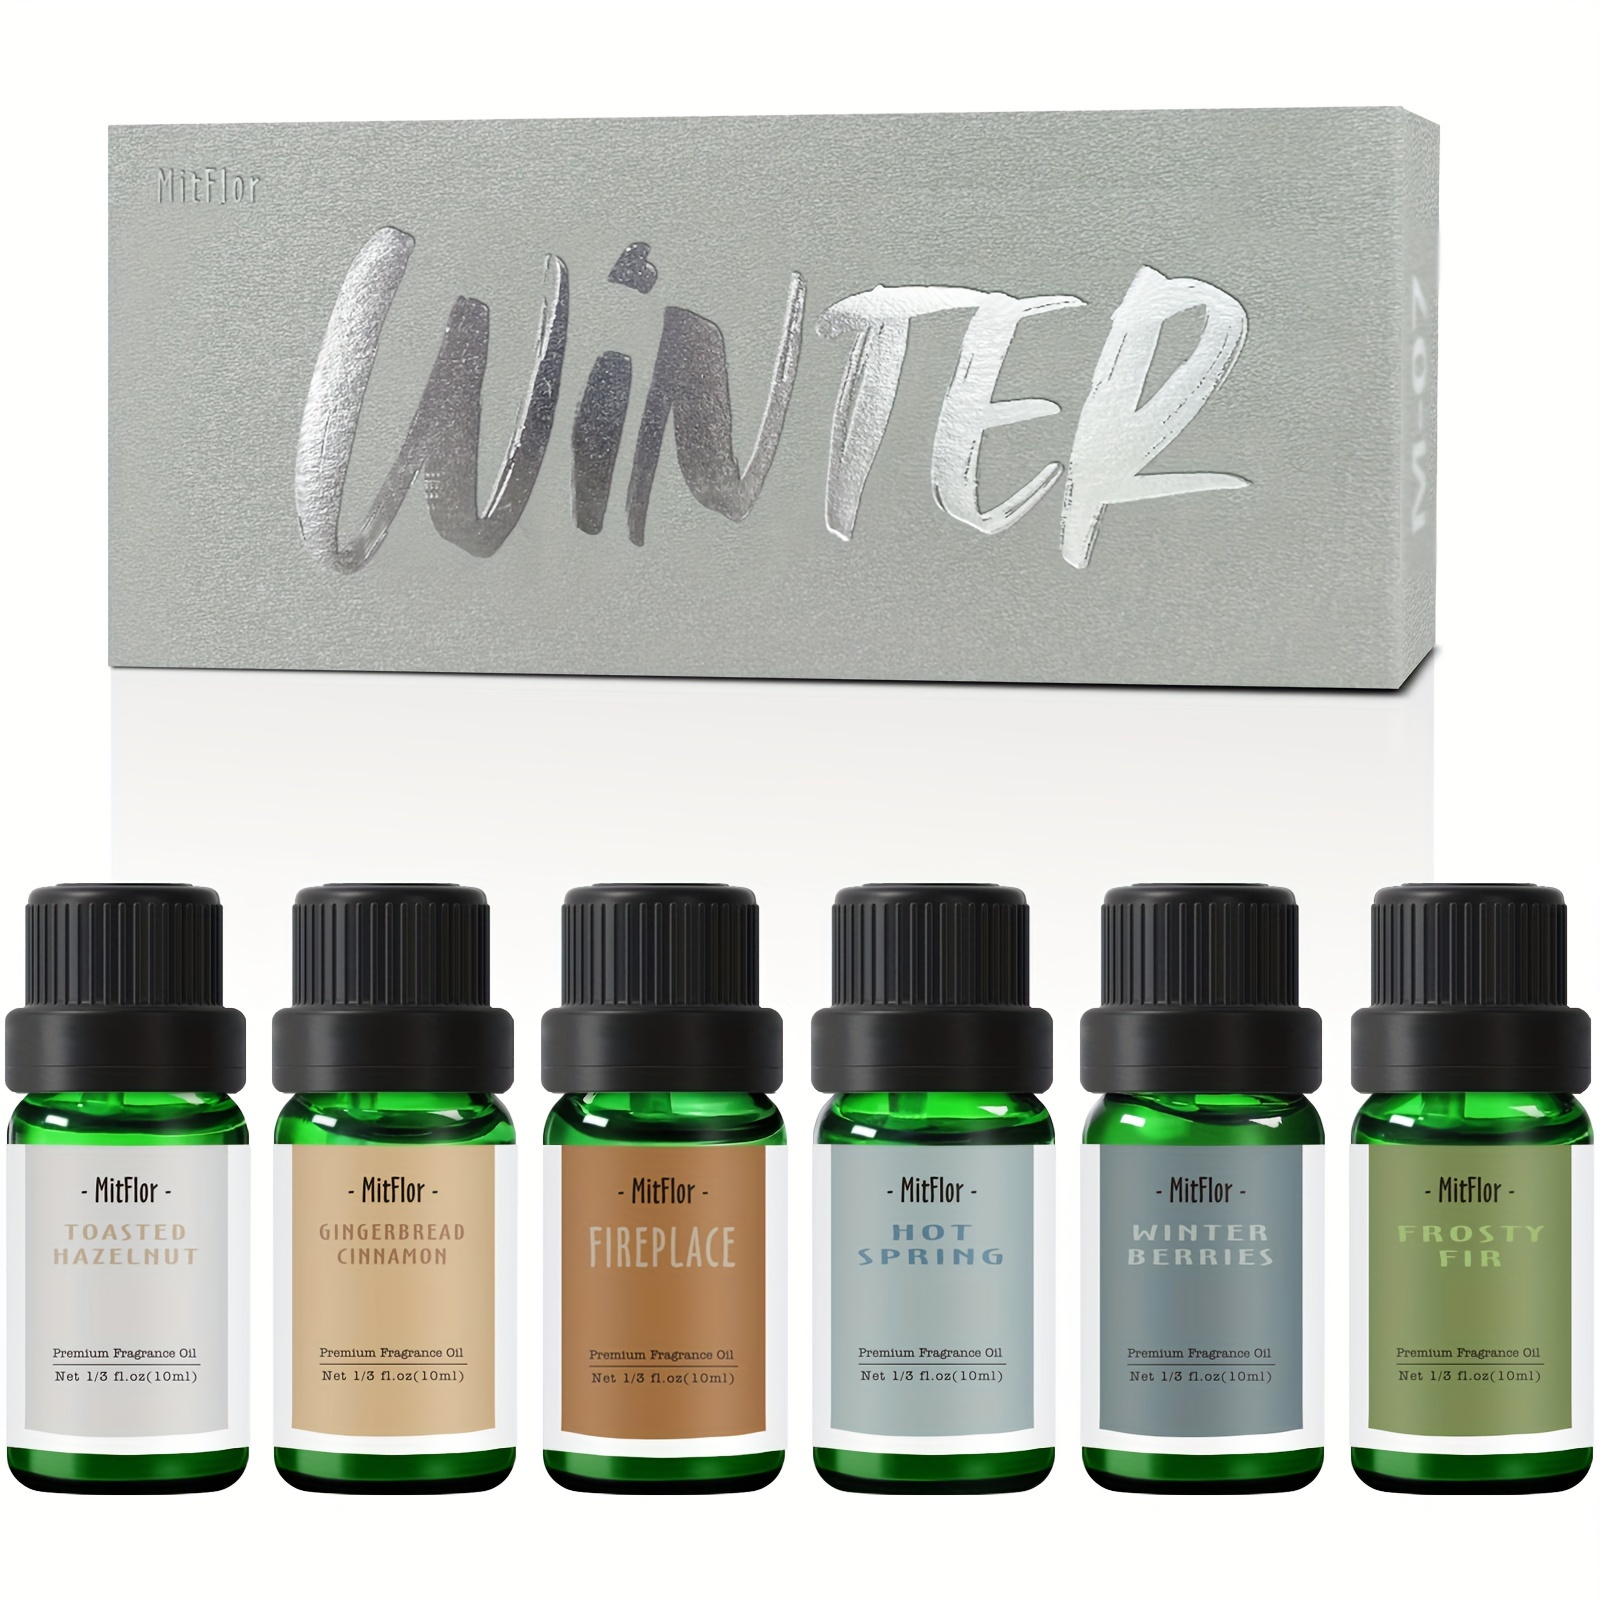 

Fragrance Oils, Mitflor Winter Essential Oils For Home Diffusers, Candle Making Scents, Premium Holiday Aromatherapy Gift Set, 6 X10ml-winter Berries, Gingerbread Cinnamon, Fireplace & More